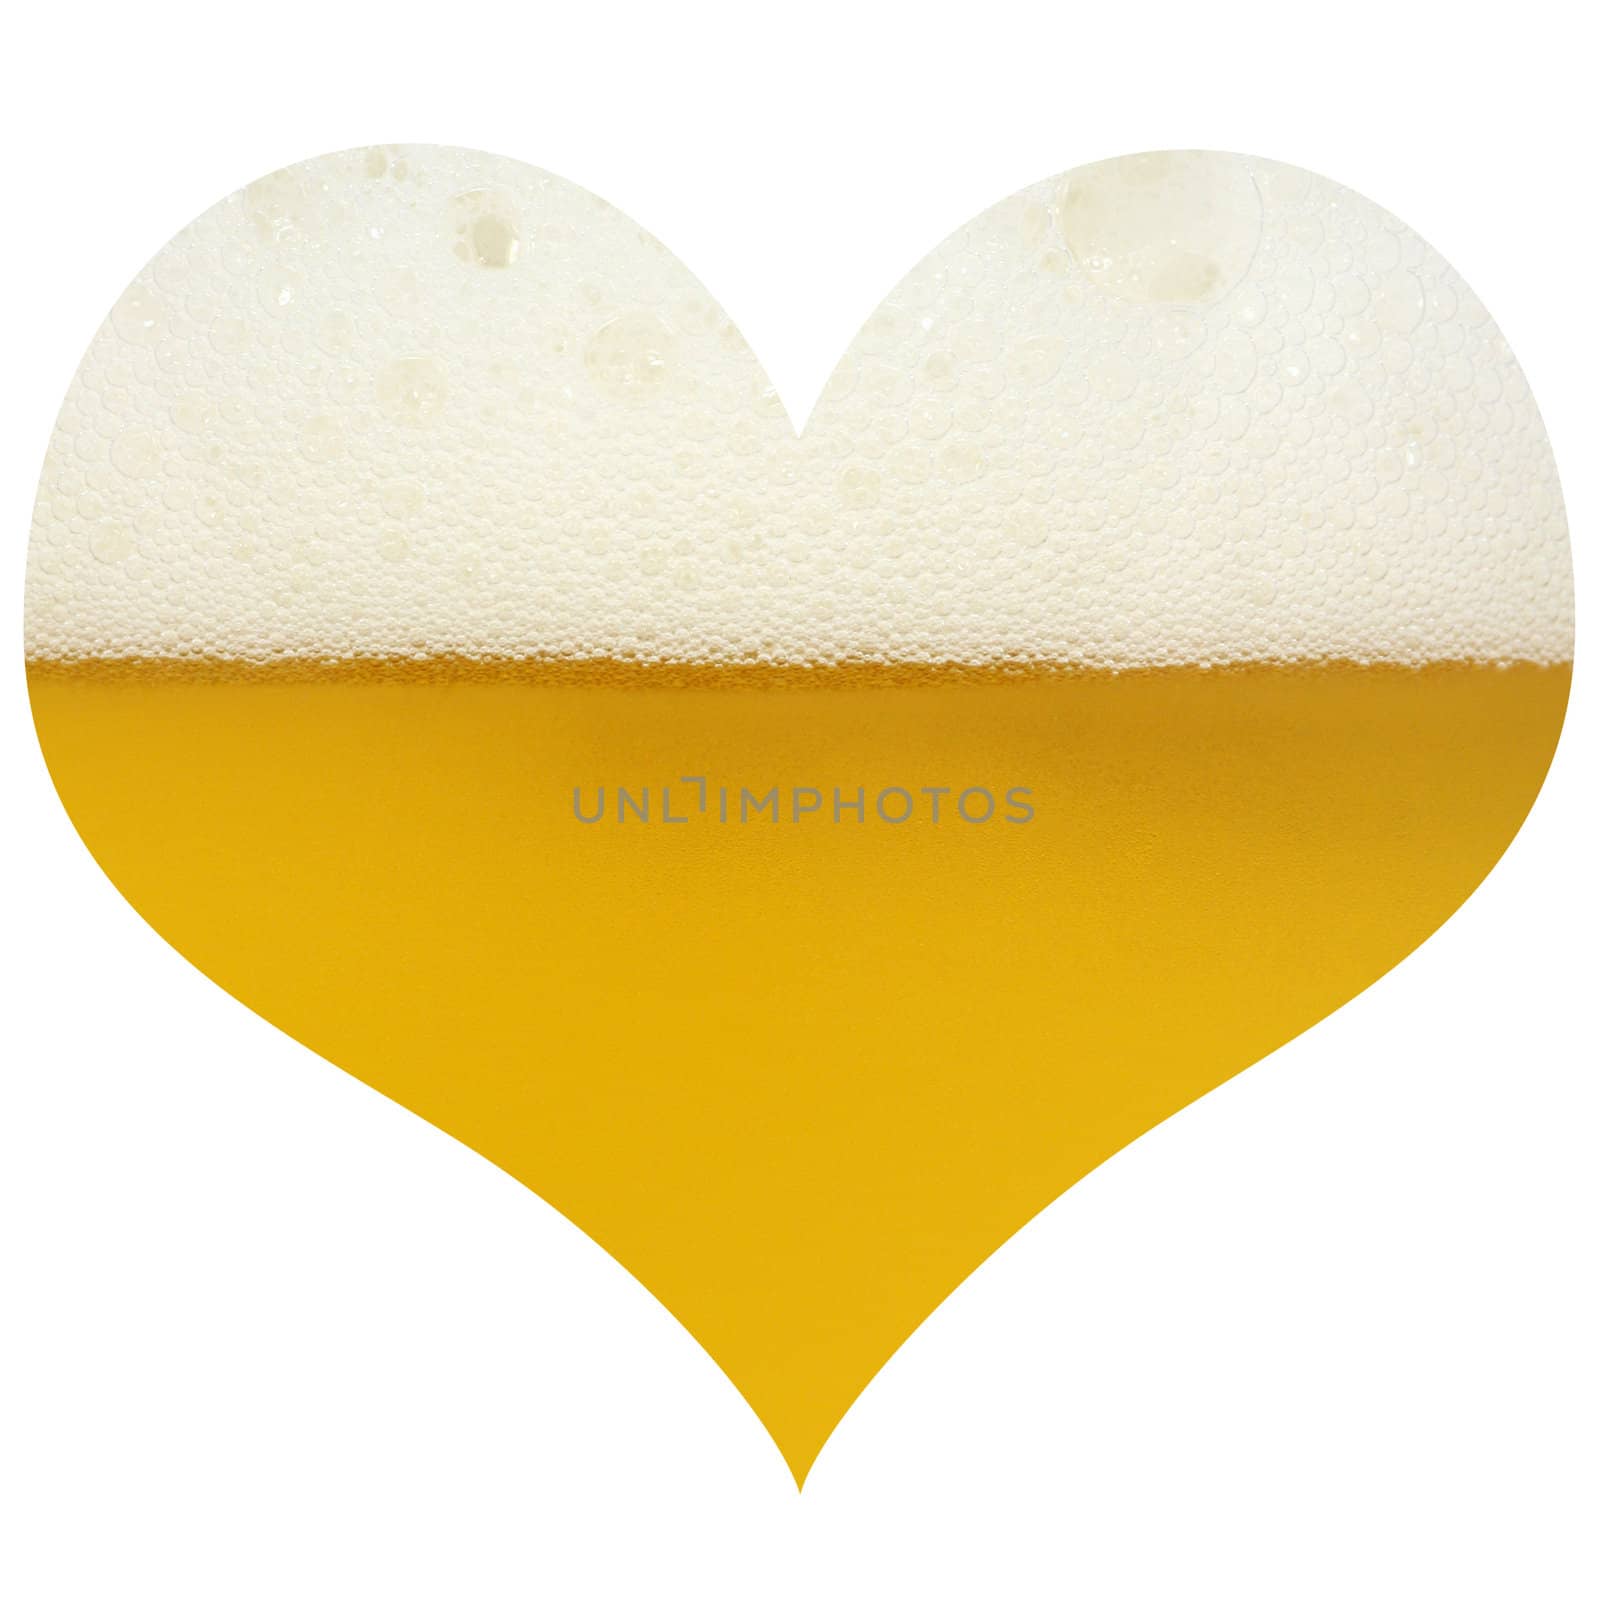 Love for Beer by Georgios